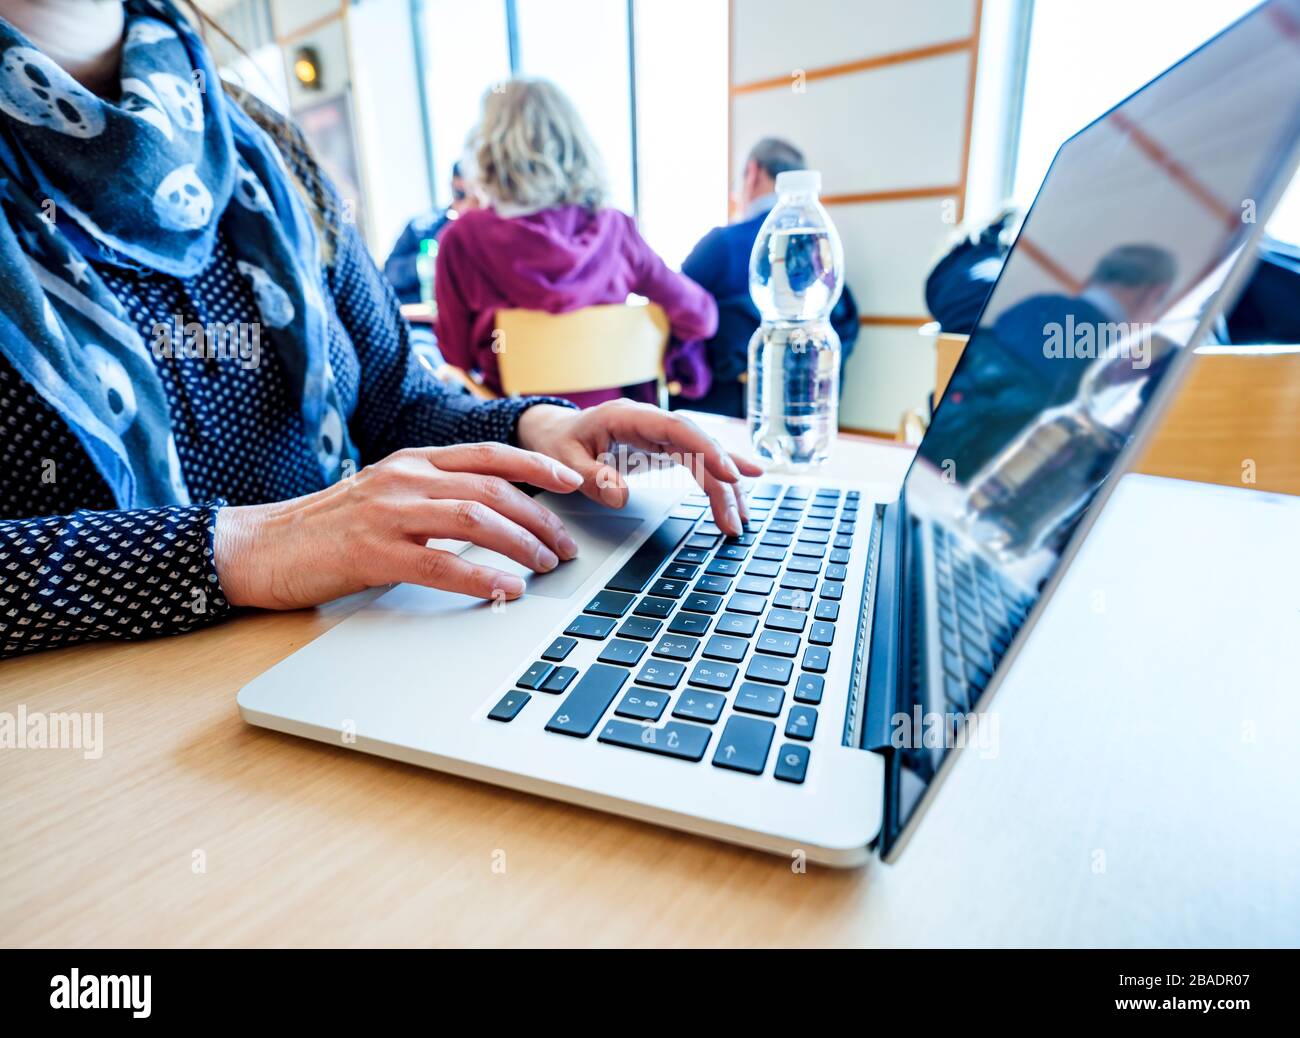 Woman using laptop, searching the web, browsing information while sitting at a table in a public place Stock Photo